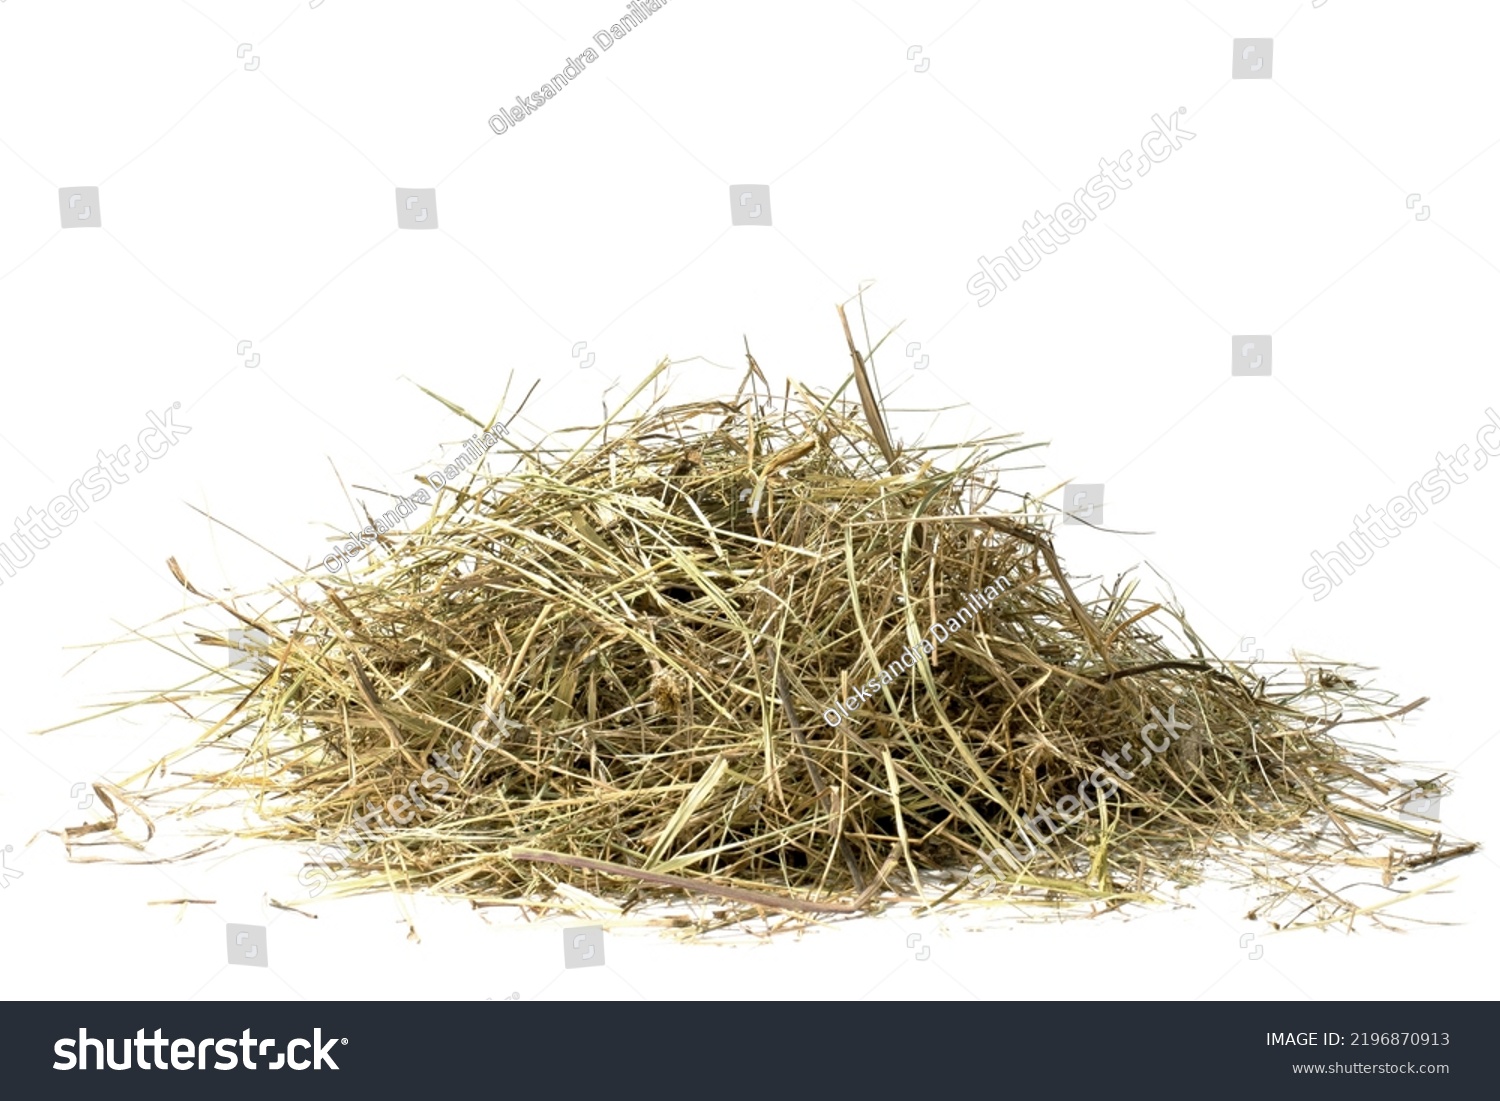 A stack of hay on a white background. #2196870913